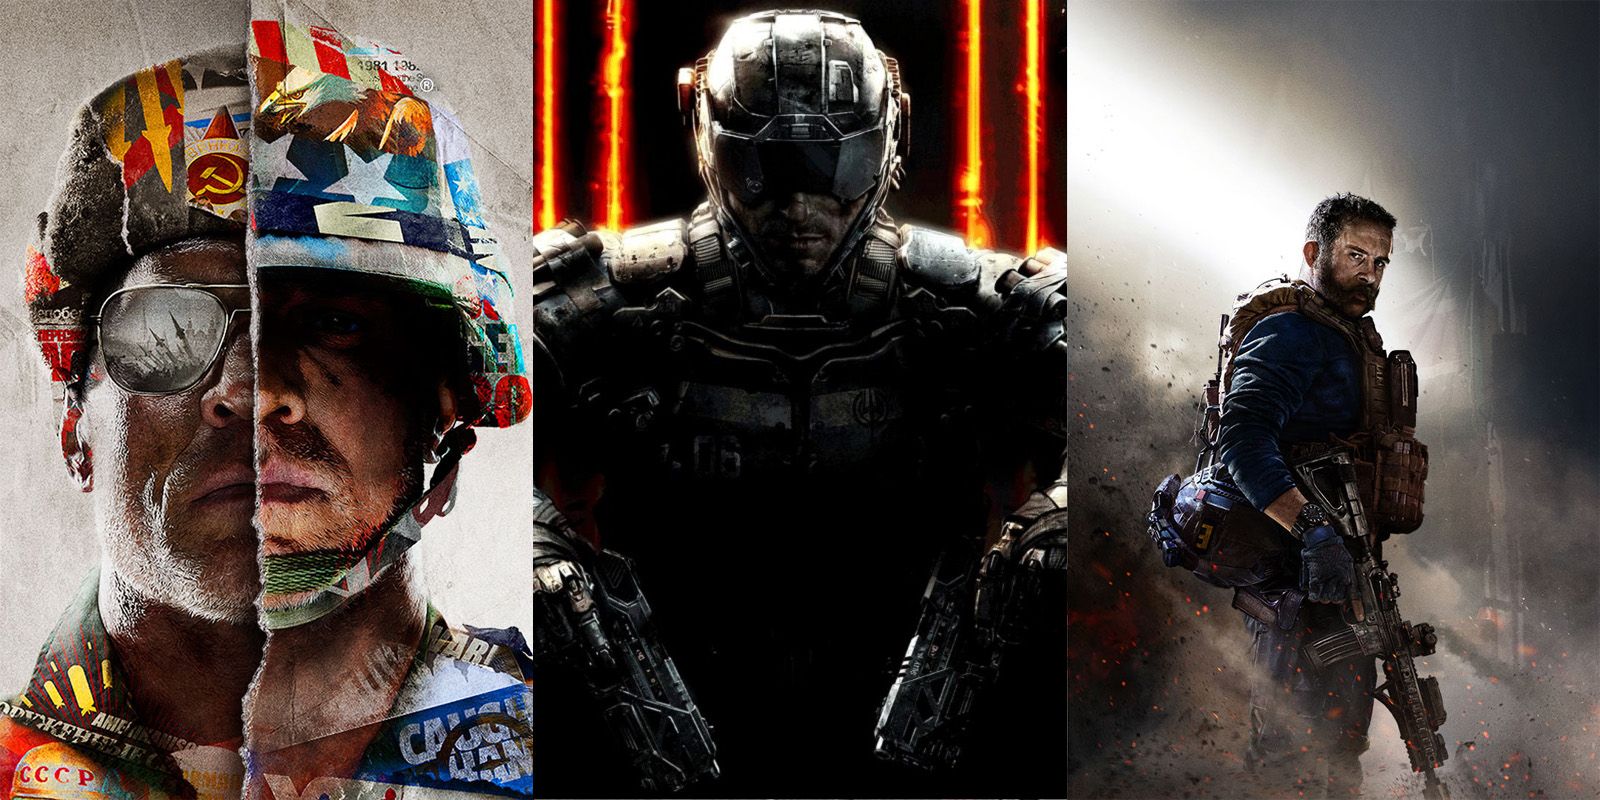 Call of Duty Games Ranked From Worst To Best, According To Metacritic